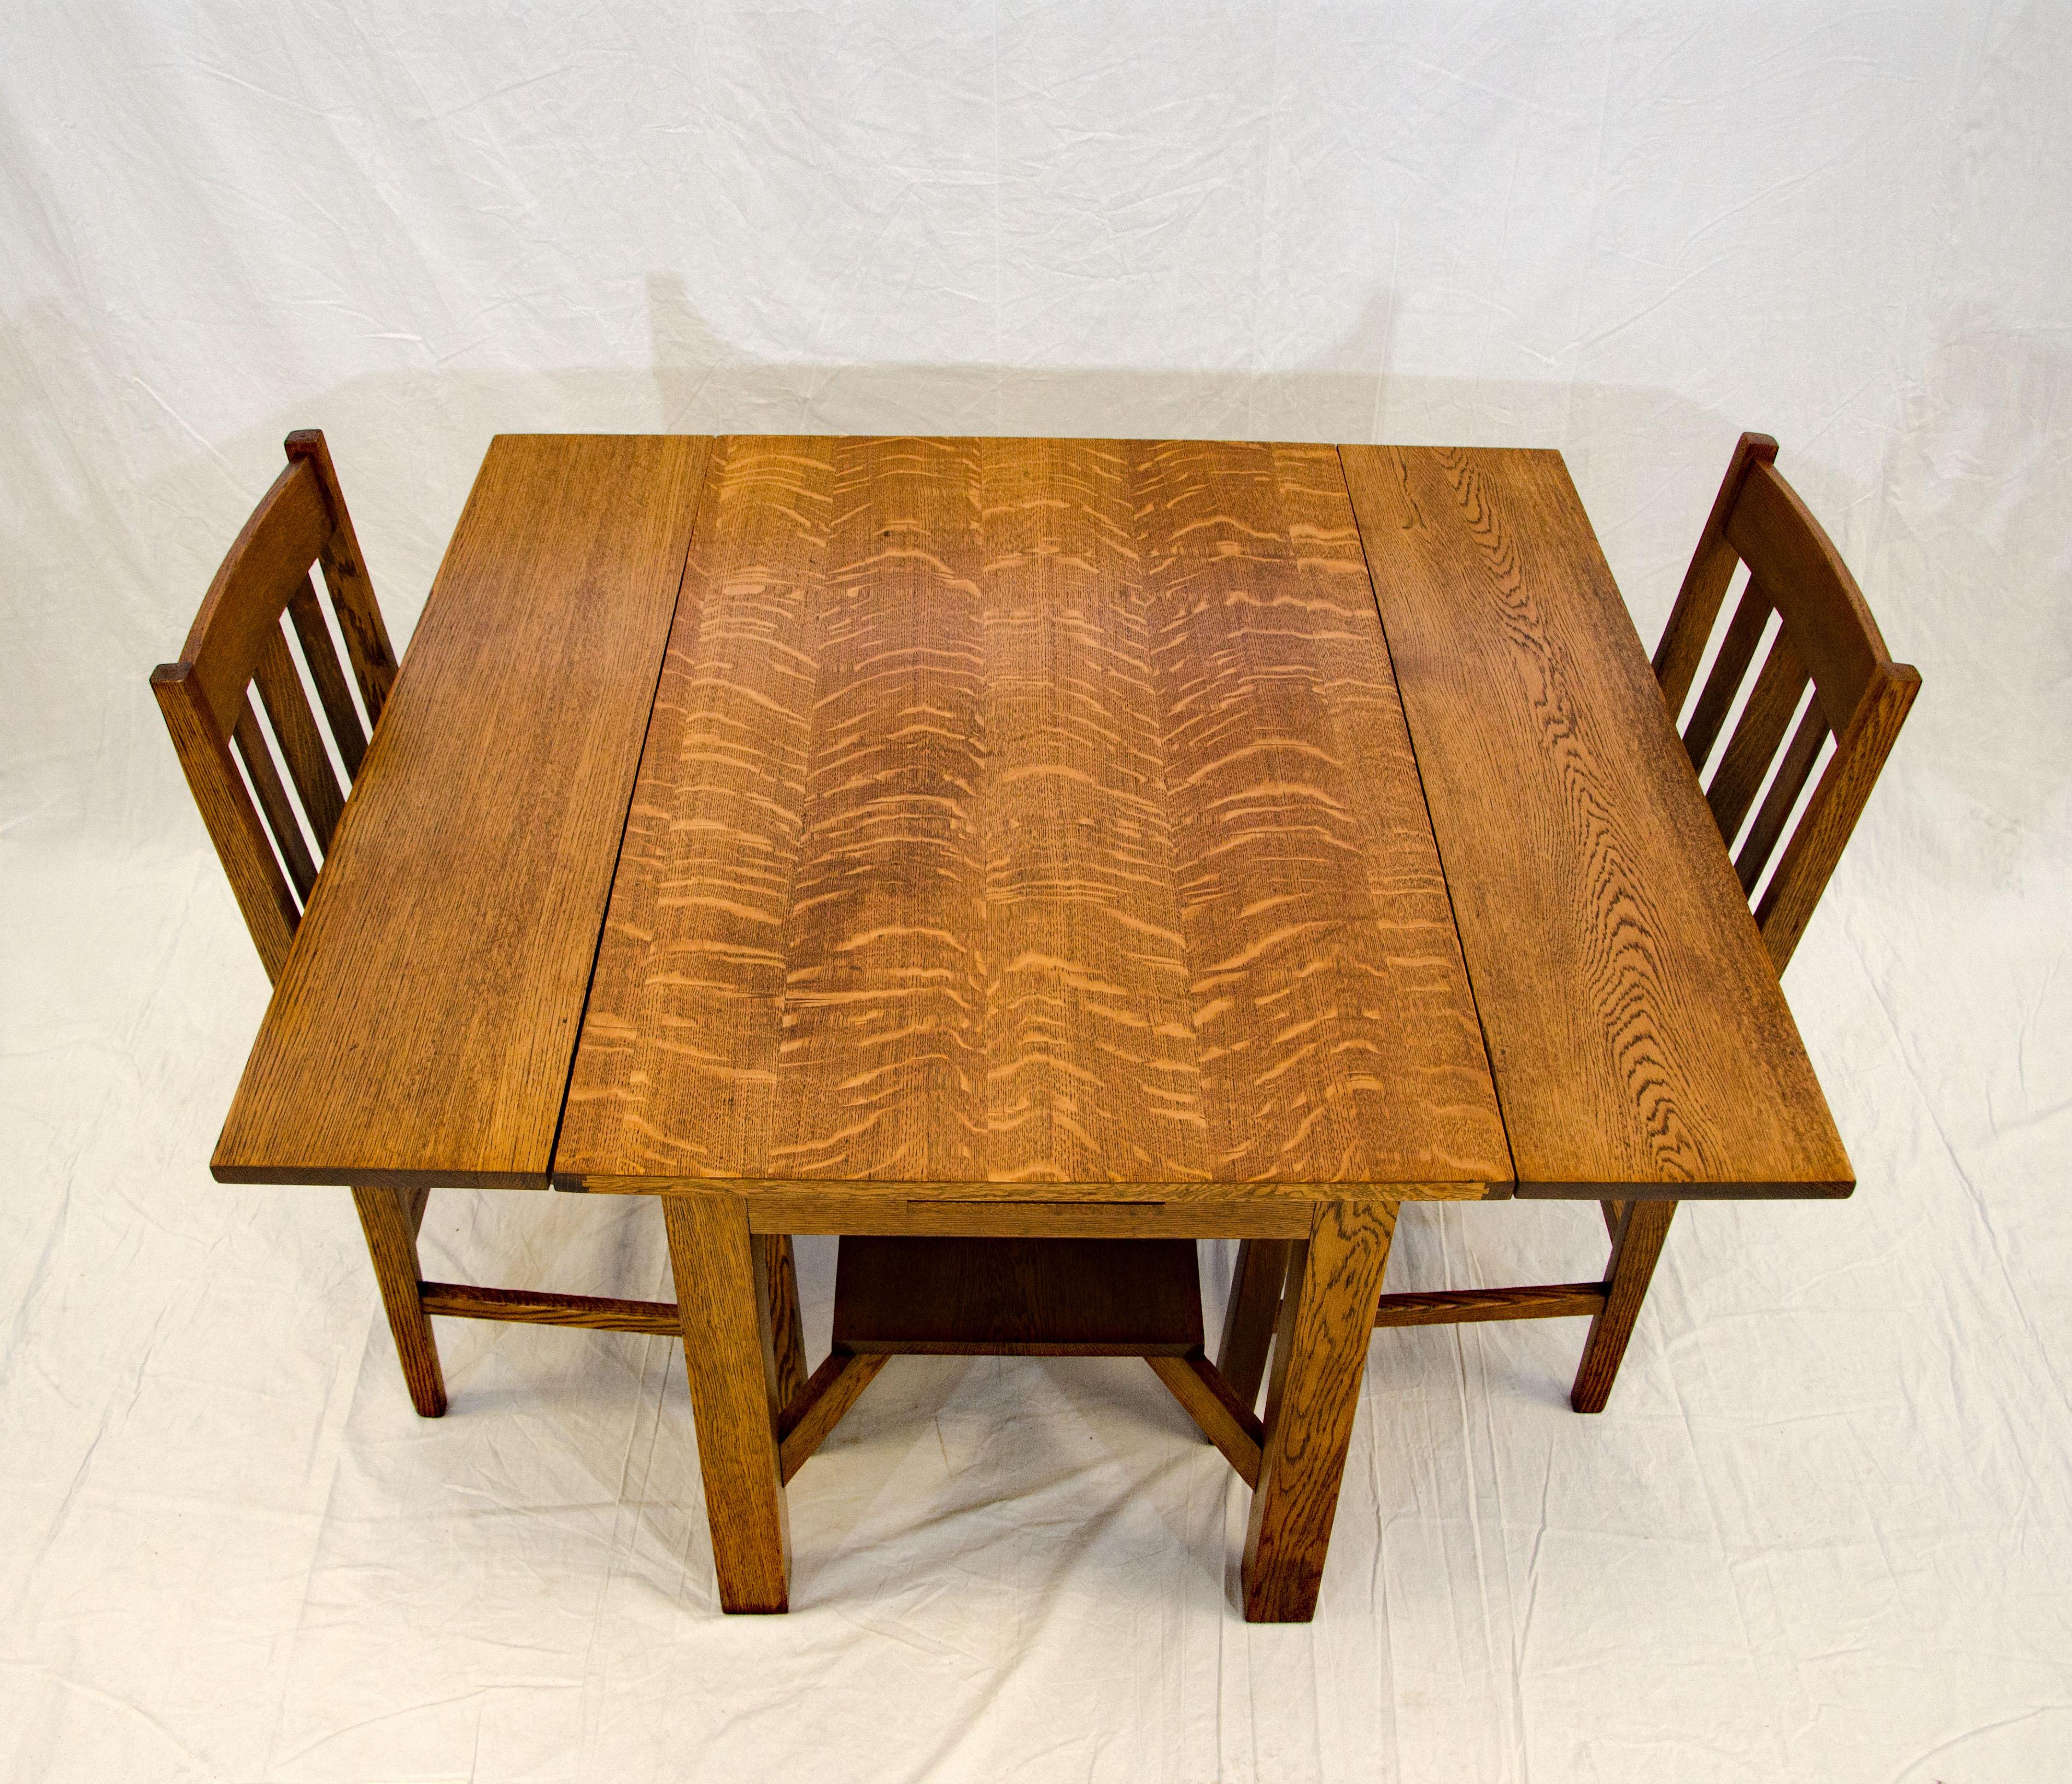 20th Century Arts & Crafts Mission Oak Library or Breakfast Table with Two Leaves, Two Chairs